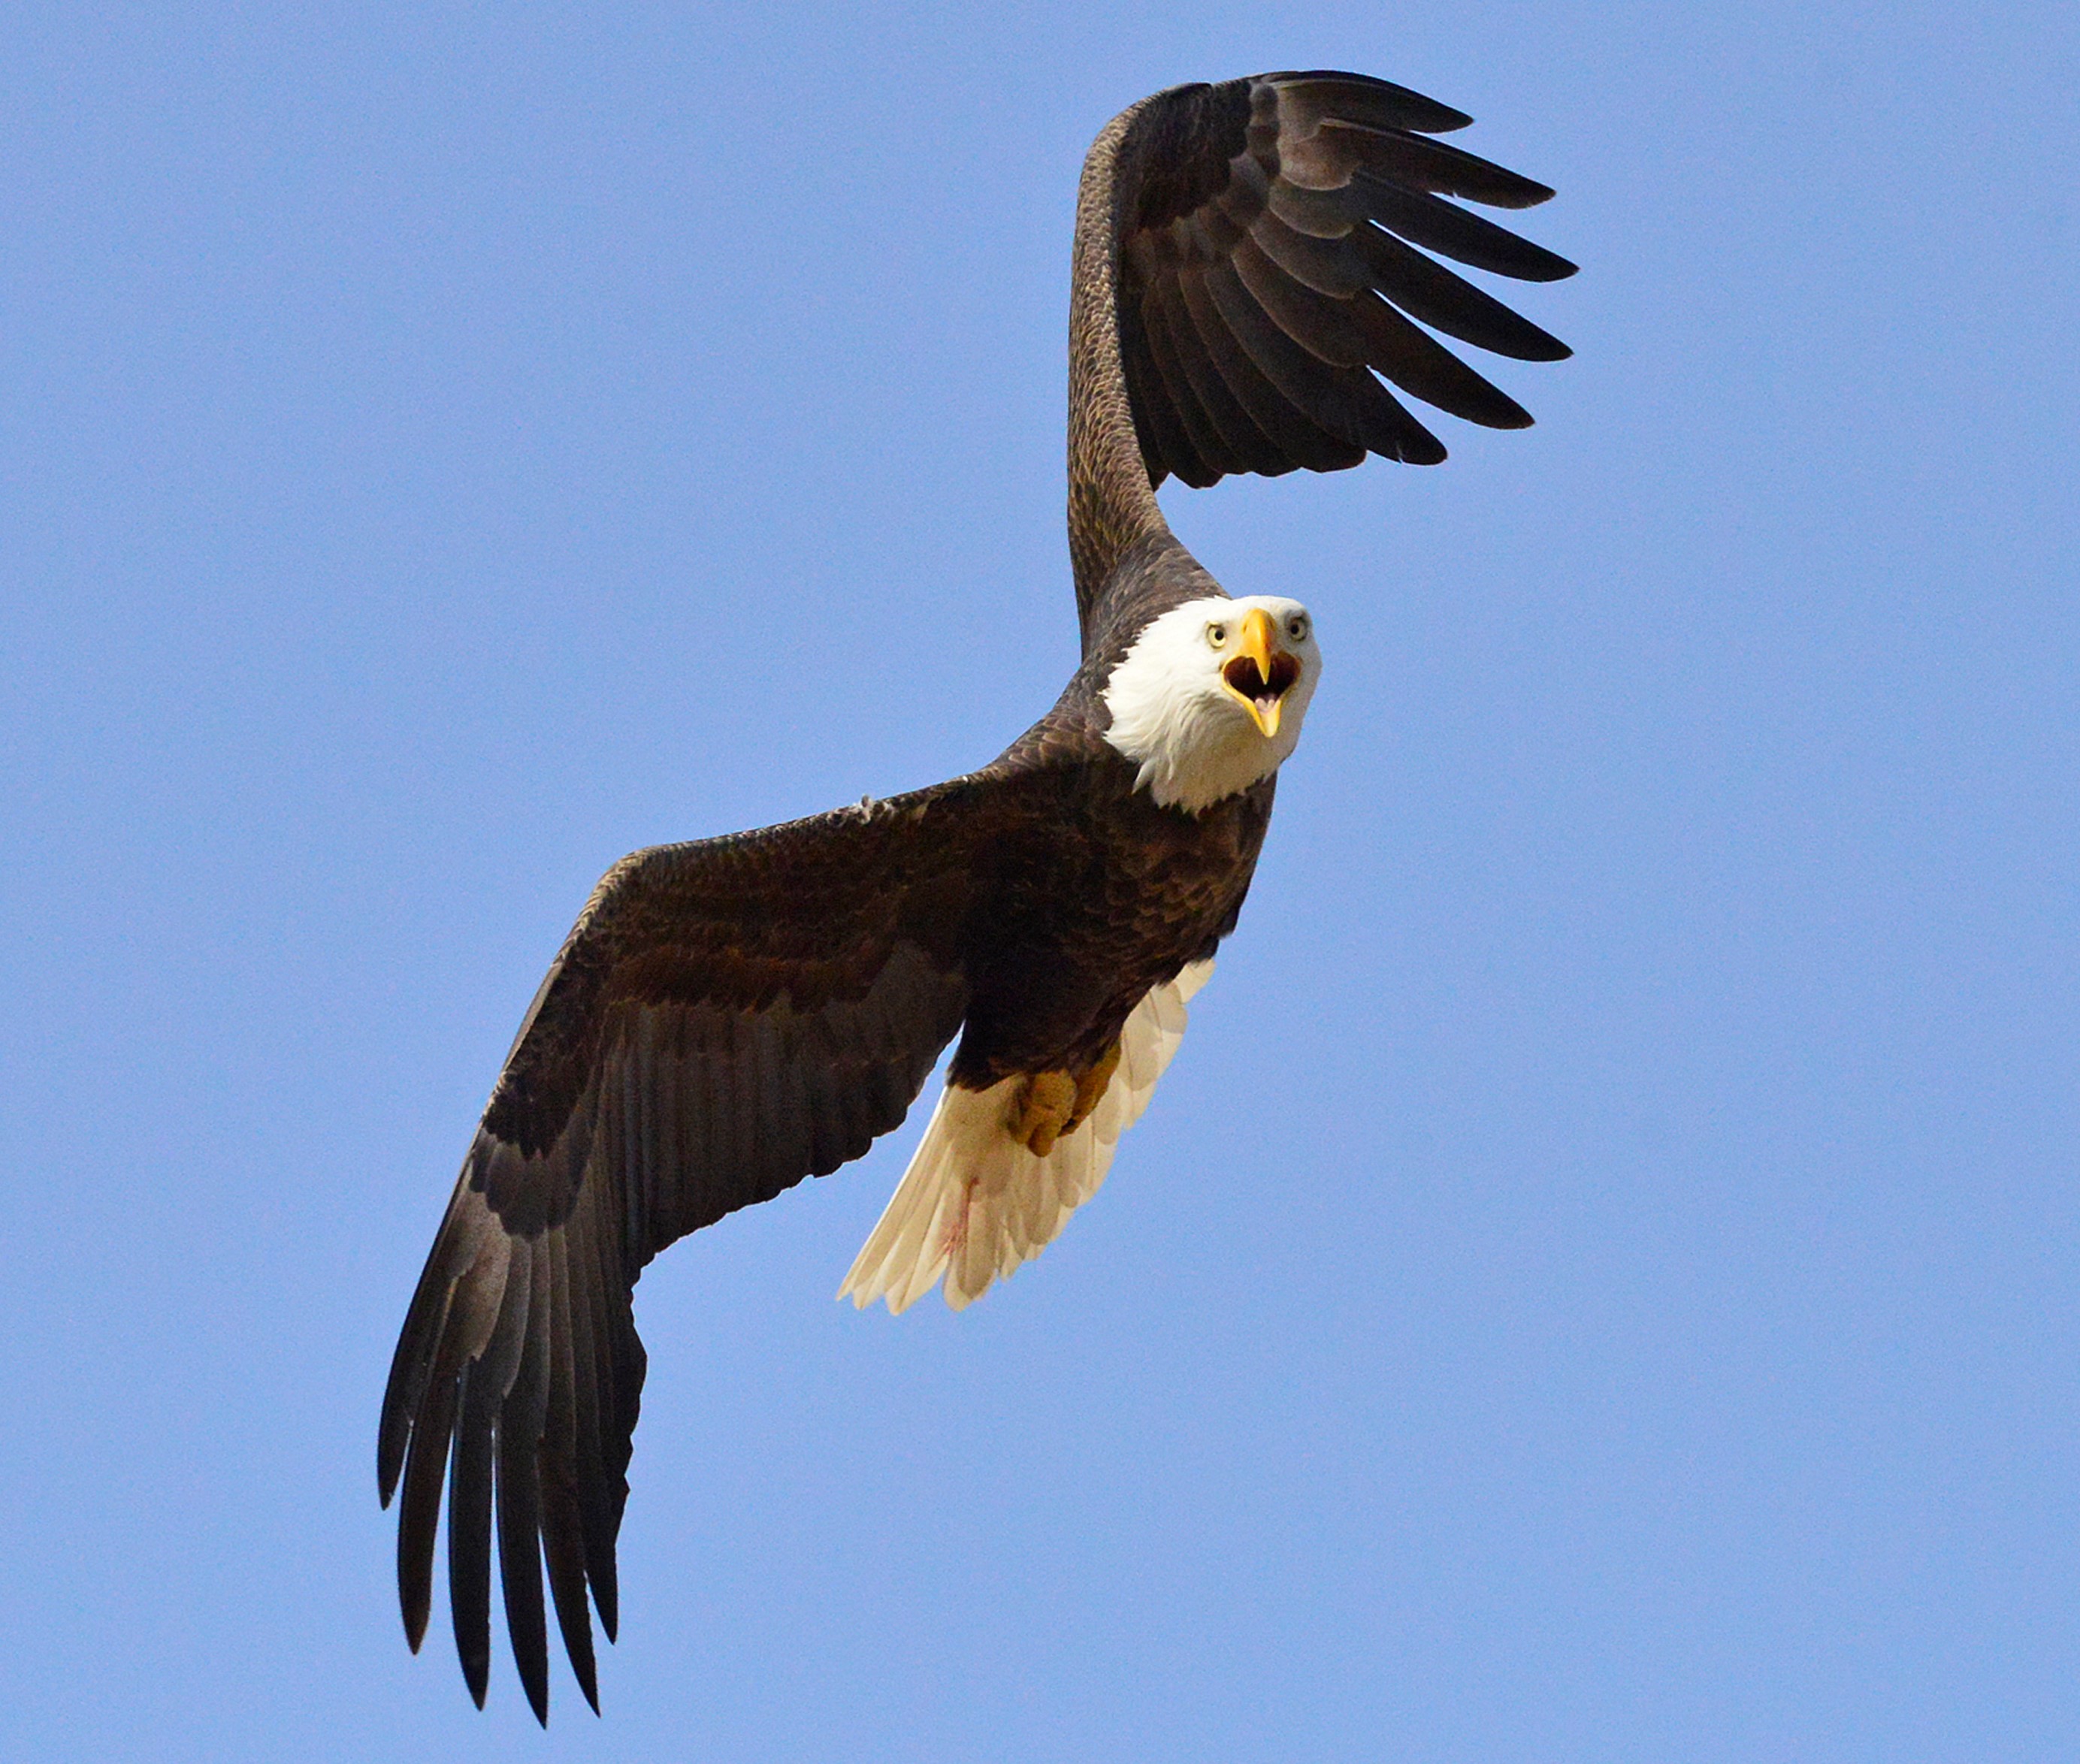 A bald eagle in mid-flight, looking directly into the camera screaming